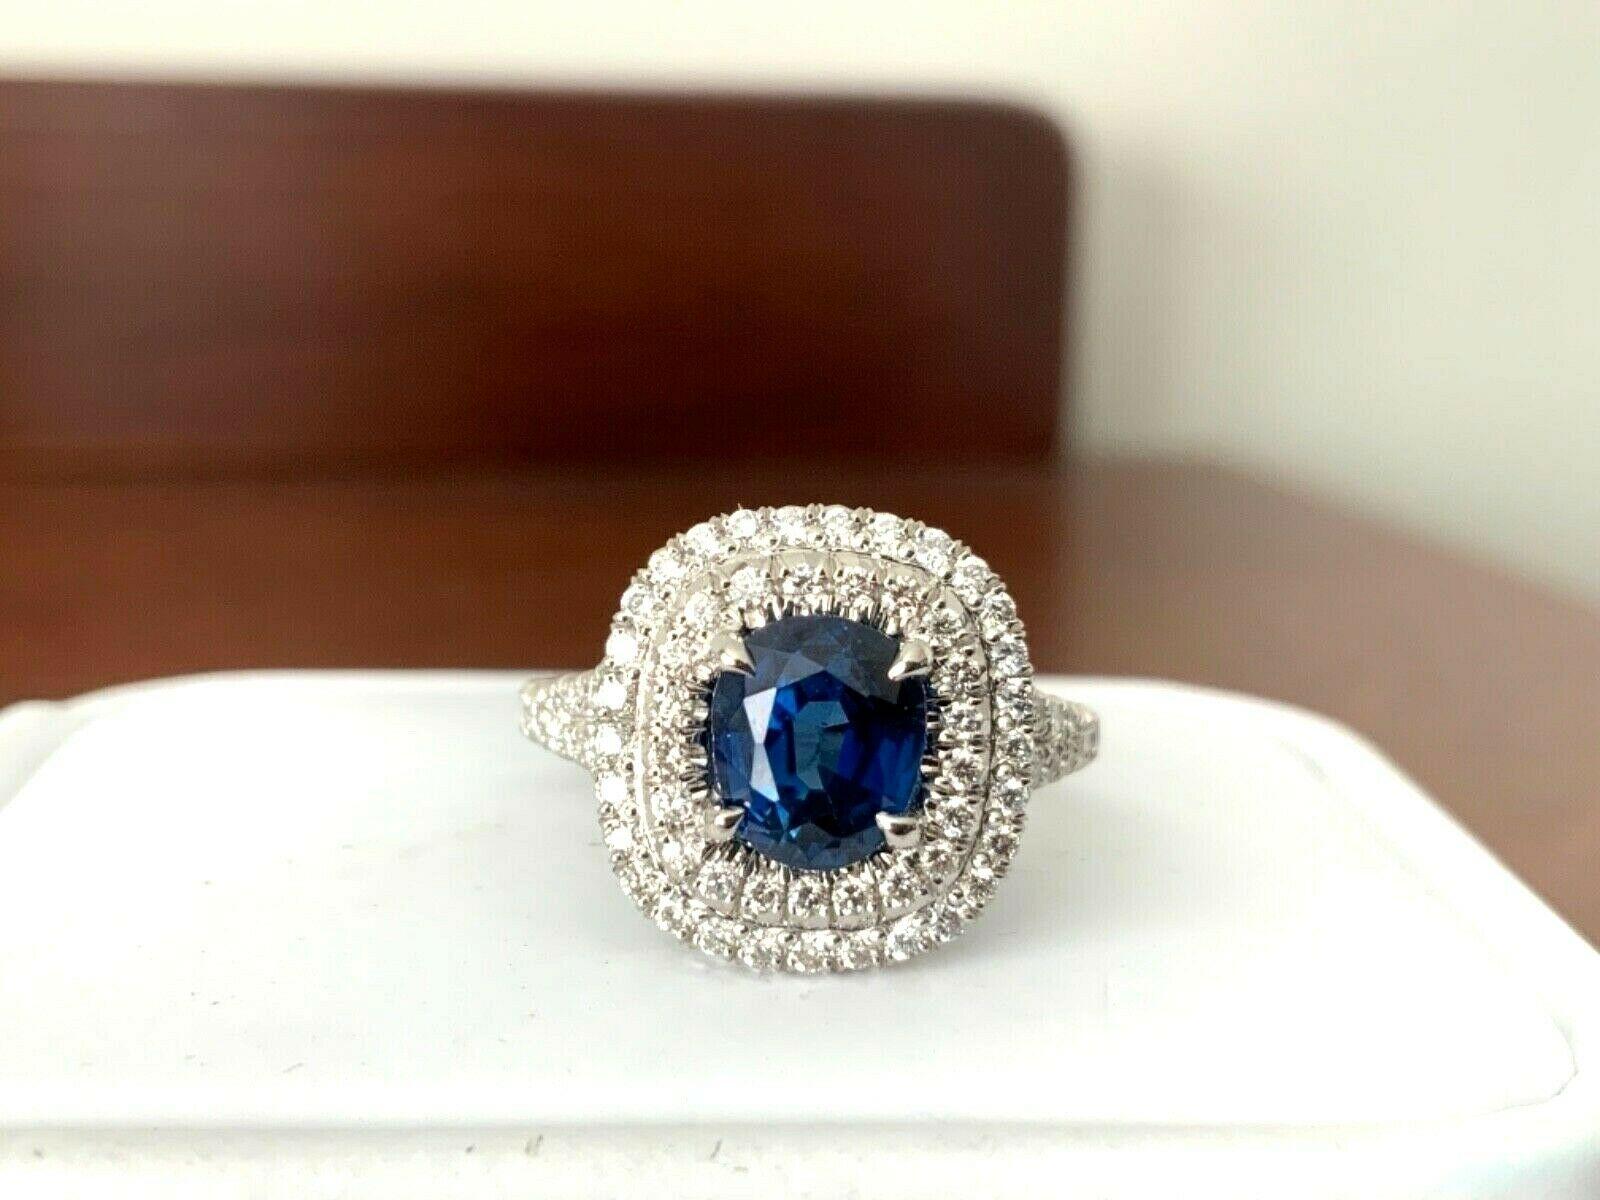 JUST IN TODAY!

You are viewing the PINNACLE OF RARE GEMSTONES - A 100% NATURAL - UNTREATED, UNHEATED DEEP ROYAL BLUE SAPPHIRE!  This ultra-rare gemstone's color is 100% NATURAL AS IT CAME OUT OF THE GROUND!  Being a 1.99 HIGH CARAT- it is ULTRA